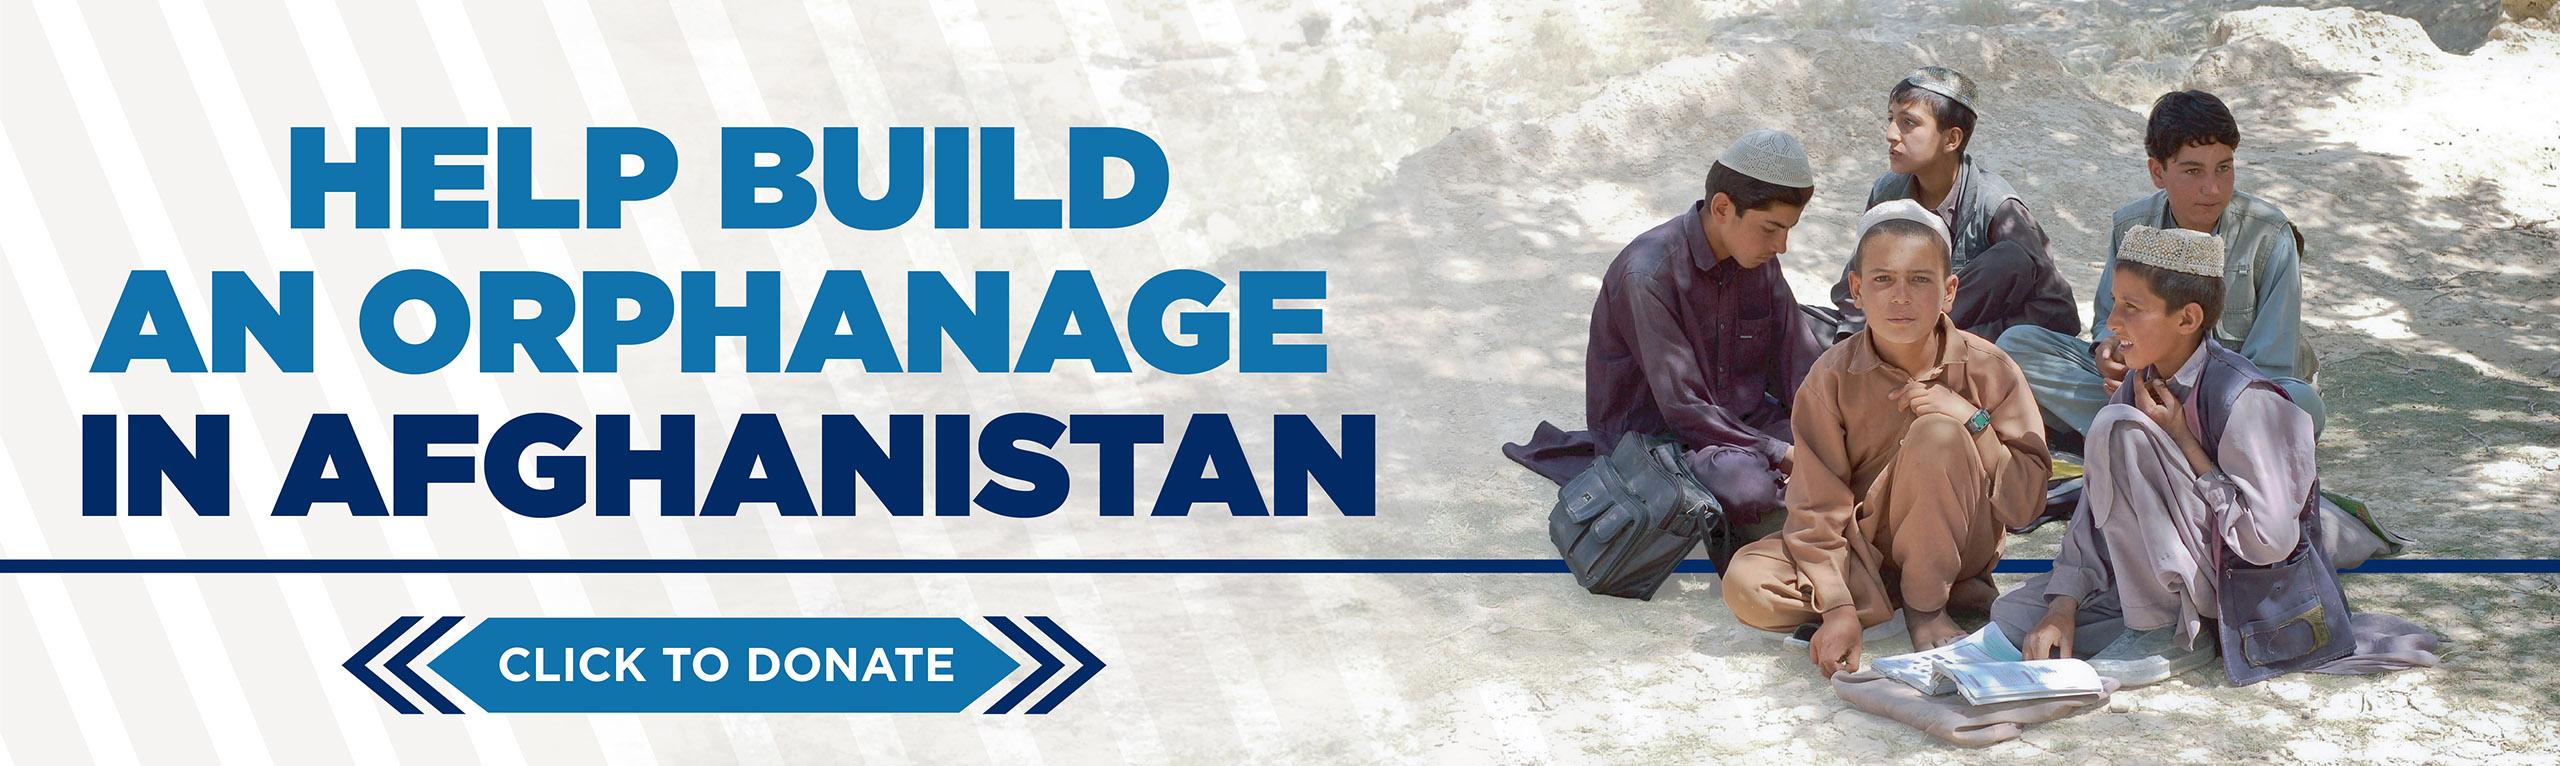 Help Build an Orphanage in Afghanistan